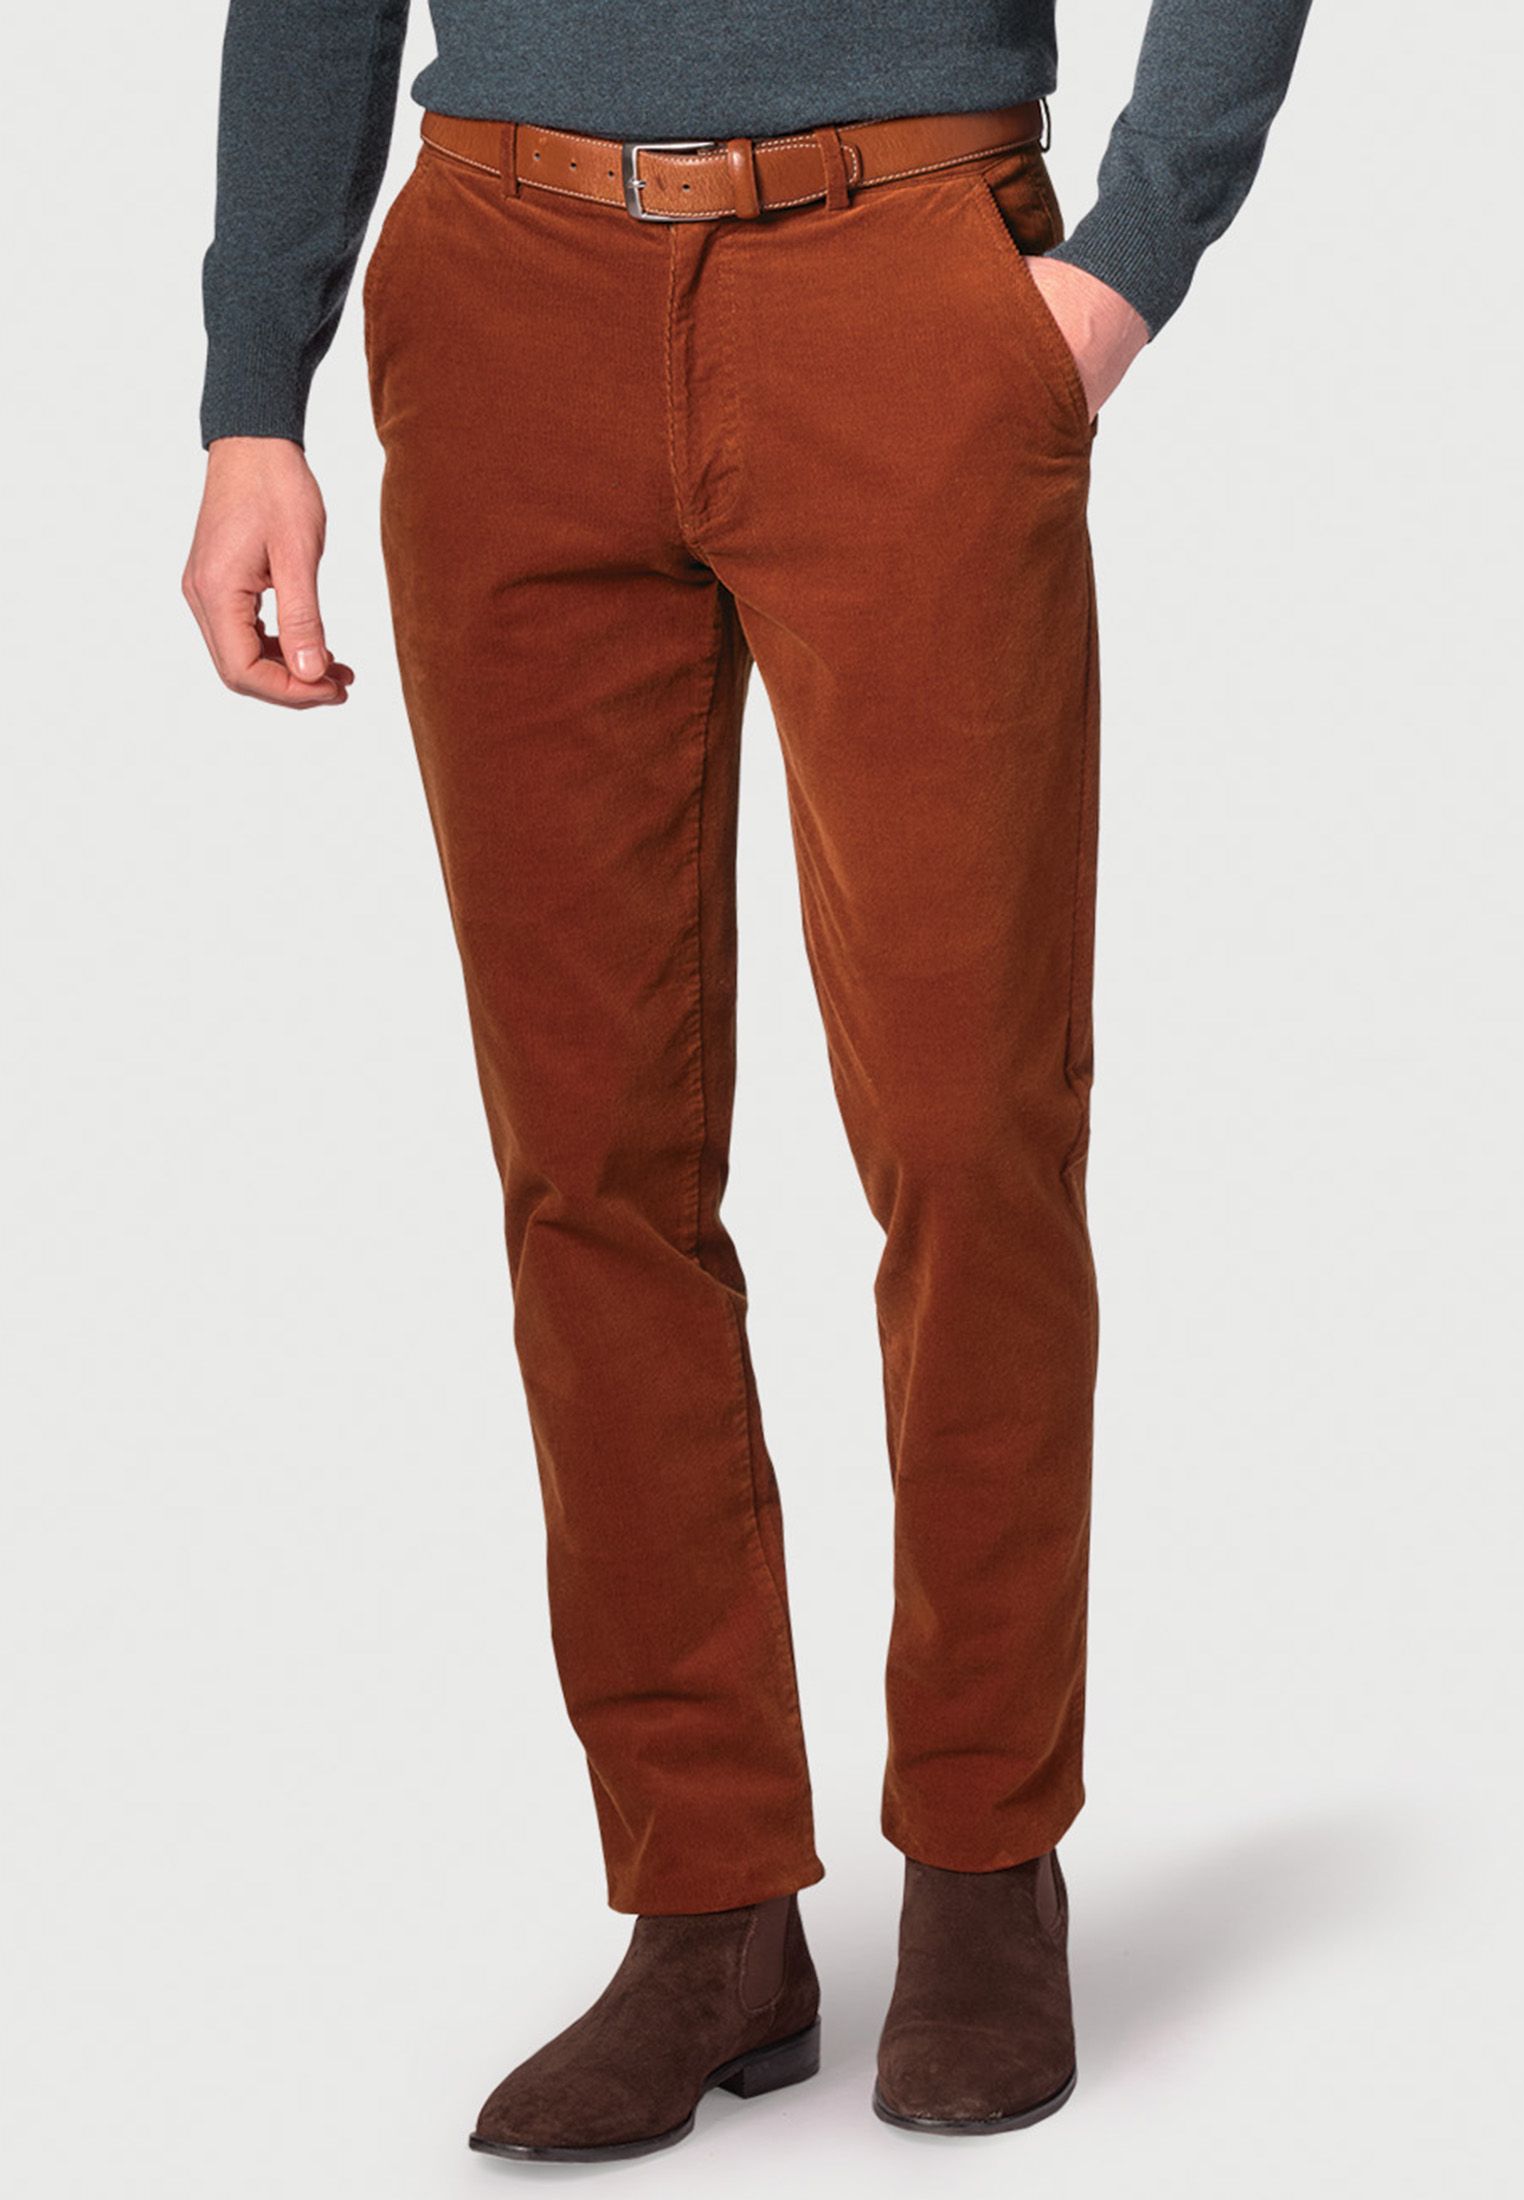 Shakespeare Russet Washed Cotton Needle Cord Pants